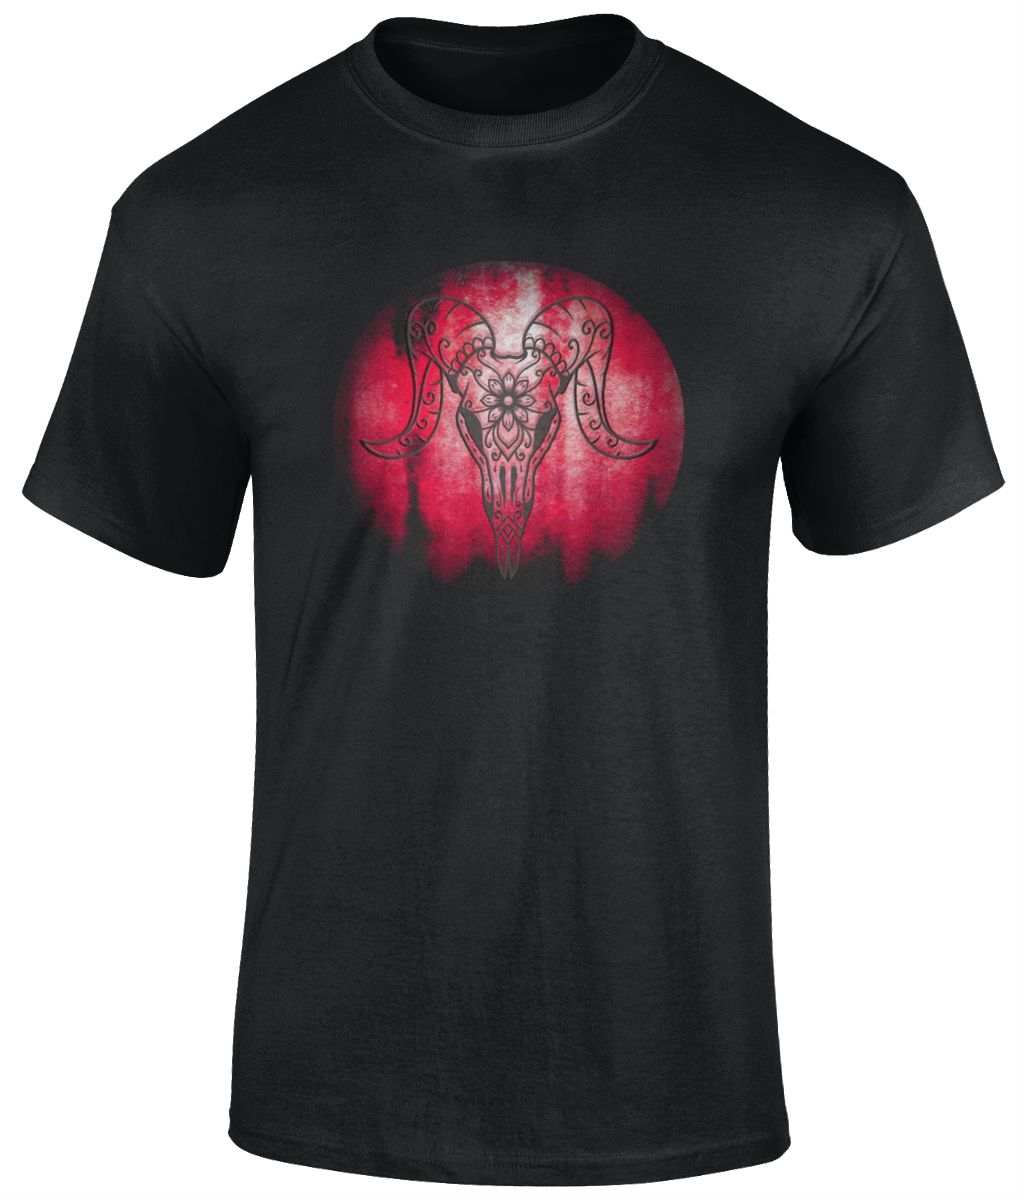 POISON VALLEY CLOTHING "SUGAR GOAT SKULL" unisex t shirt  Original artwork by Poison Valley Clothing.     Material: 100% cotton.  Seamless twin needle collar. Taped neck and shoulders. Tubular body. Twin needle sleeves and hem. Black Sizes: S, L ,XL, XXL, 3XL, 4XL, 5XL